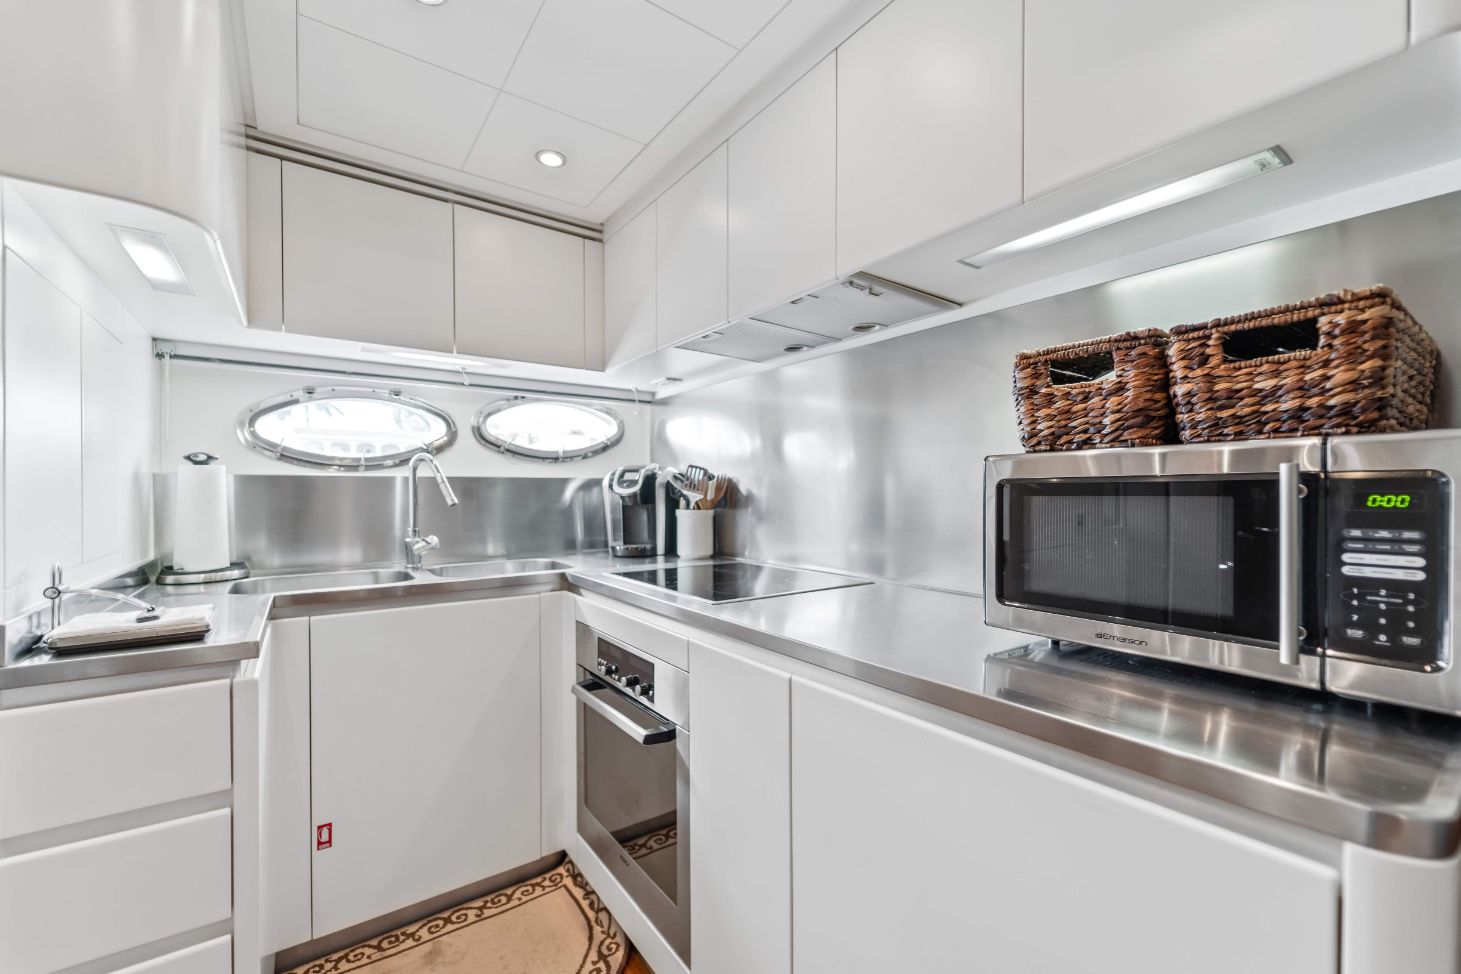 Kitchen and Sink Section of the Jerico 92 Ft Pershing Luxury Yacht